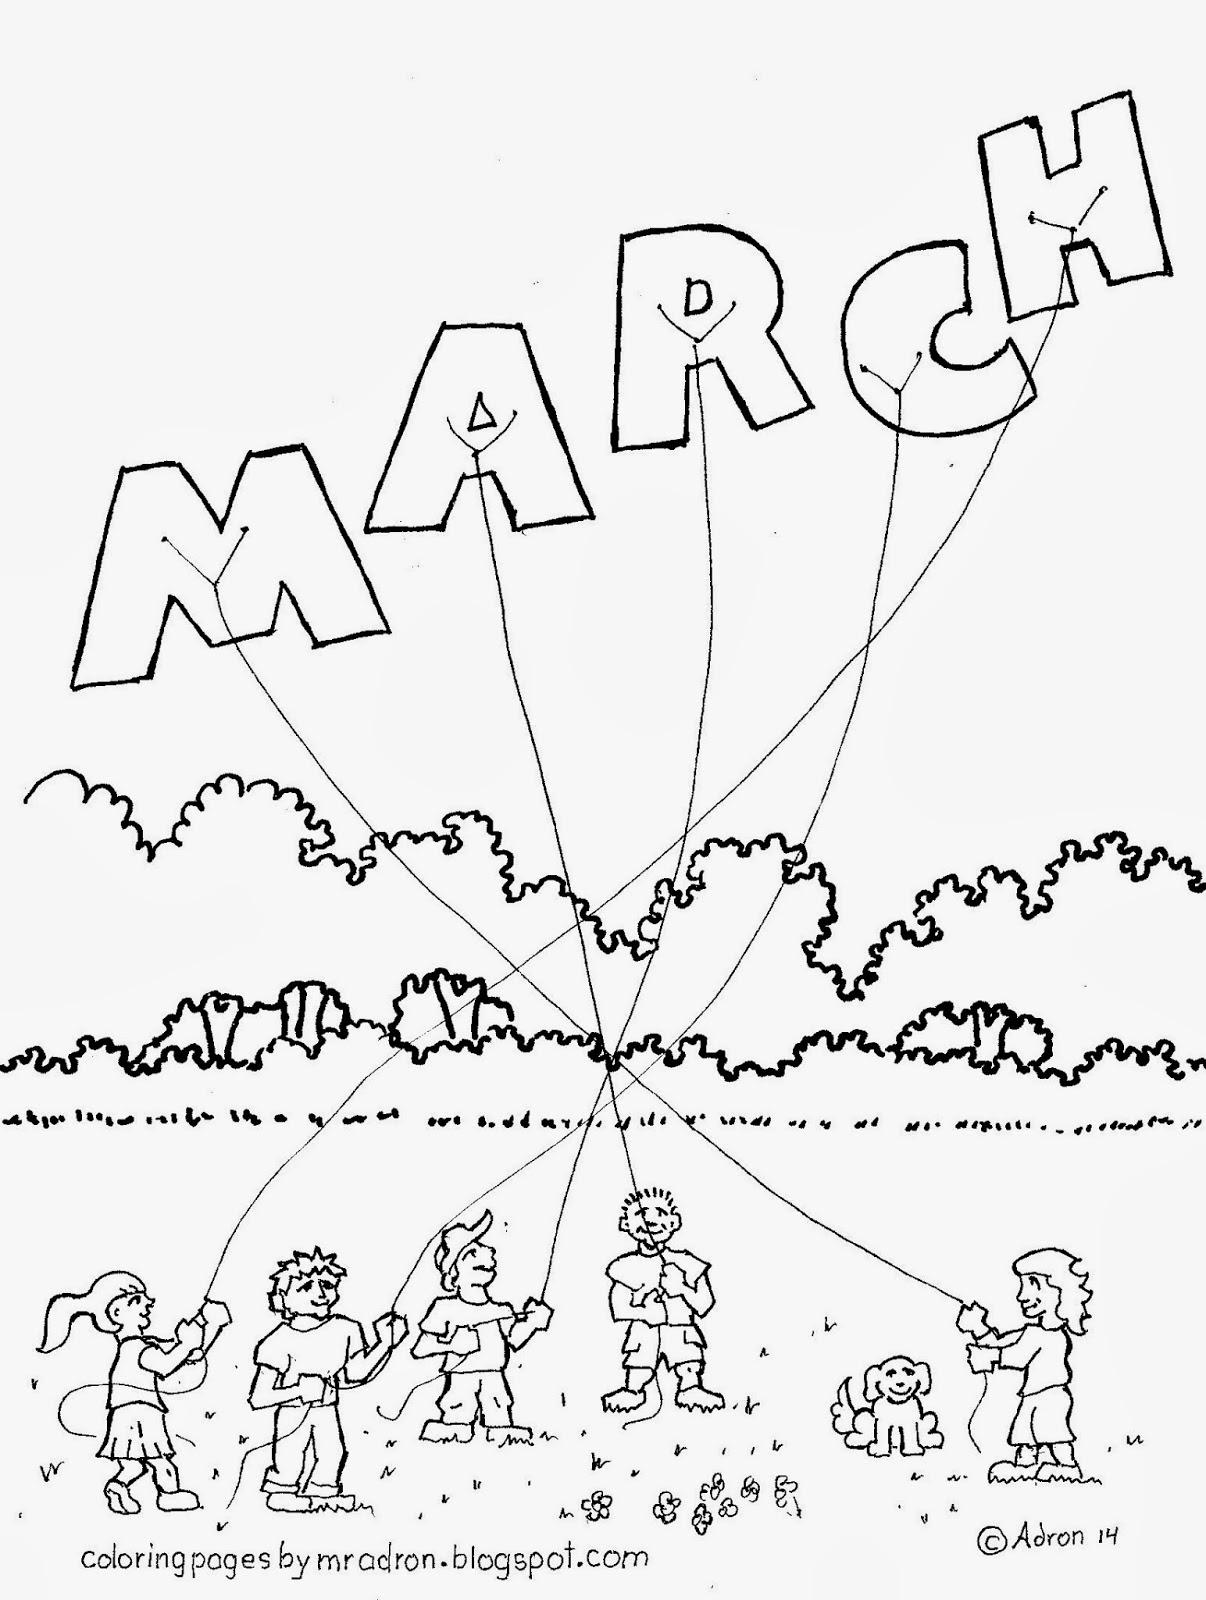 Coloring Pages For Kids By Mr Adron Month Of March Free Coloring Page For Kids 